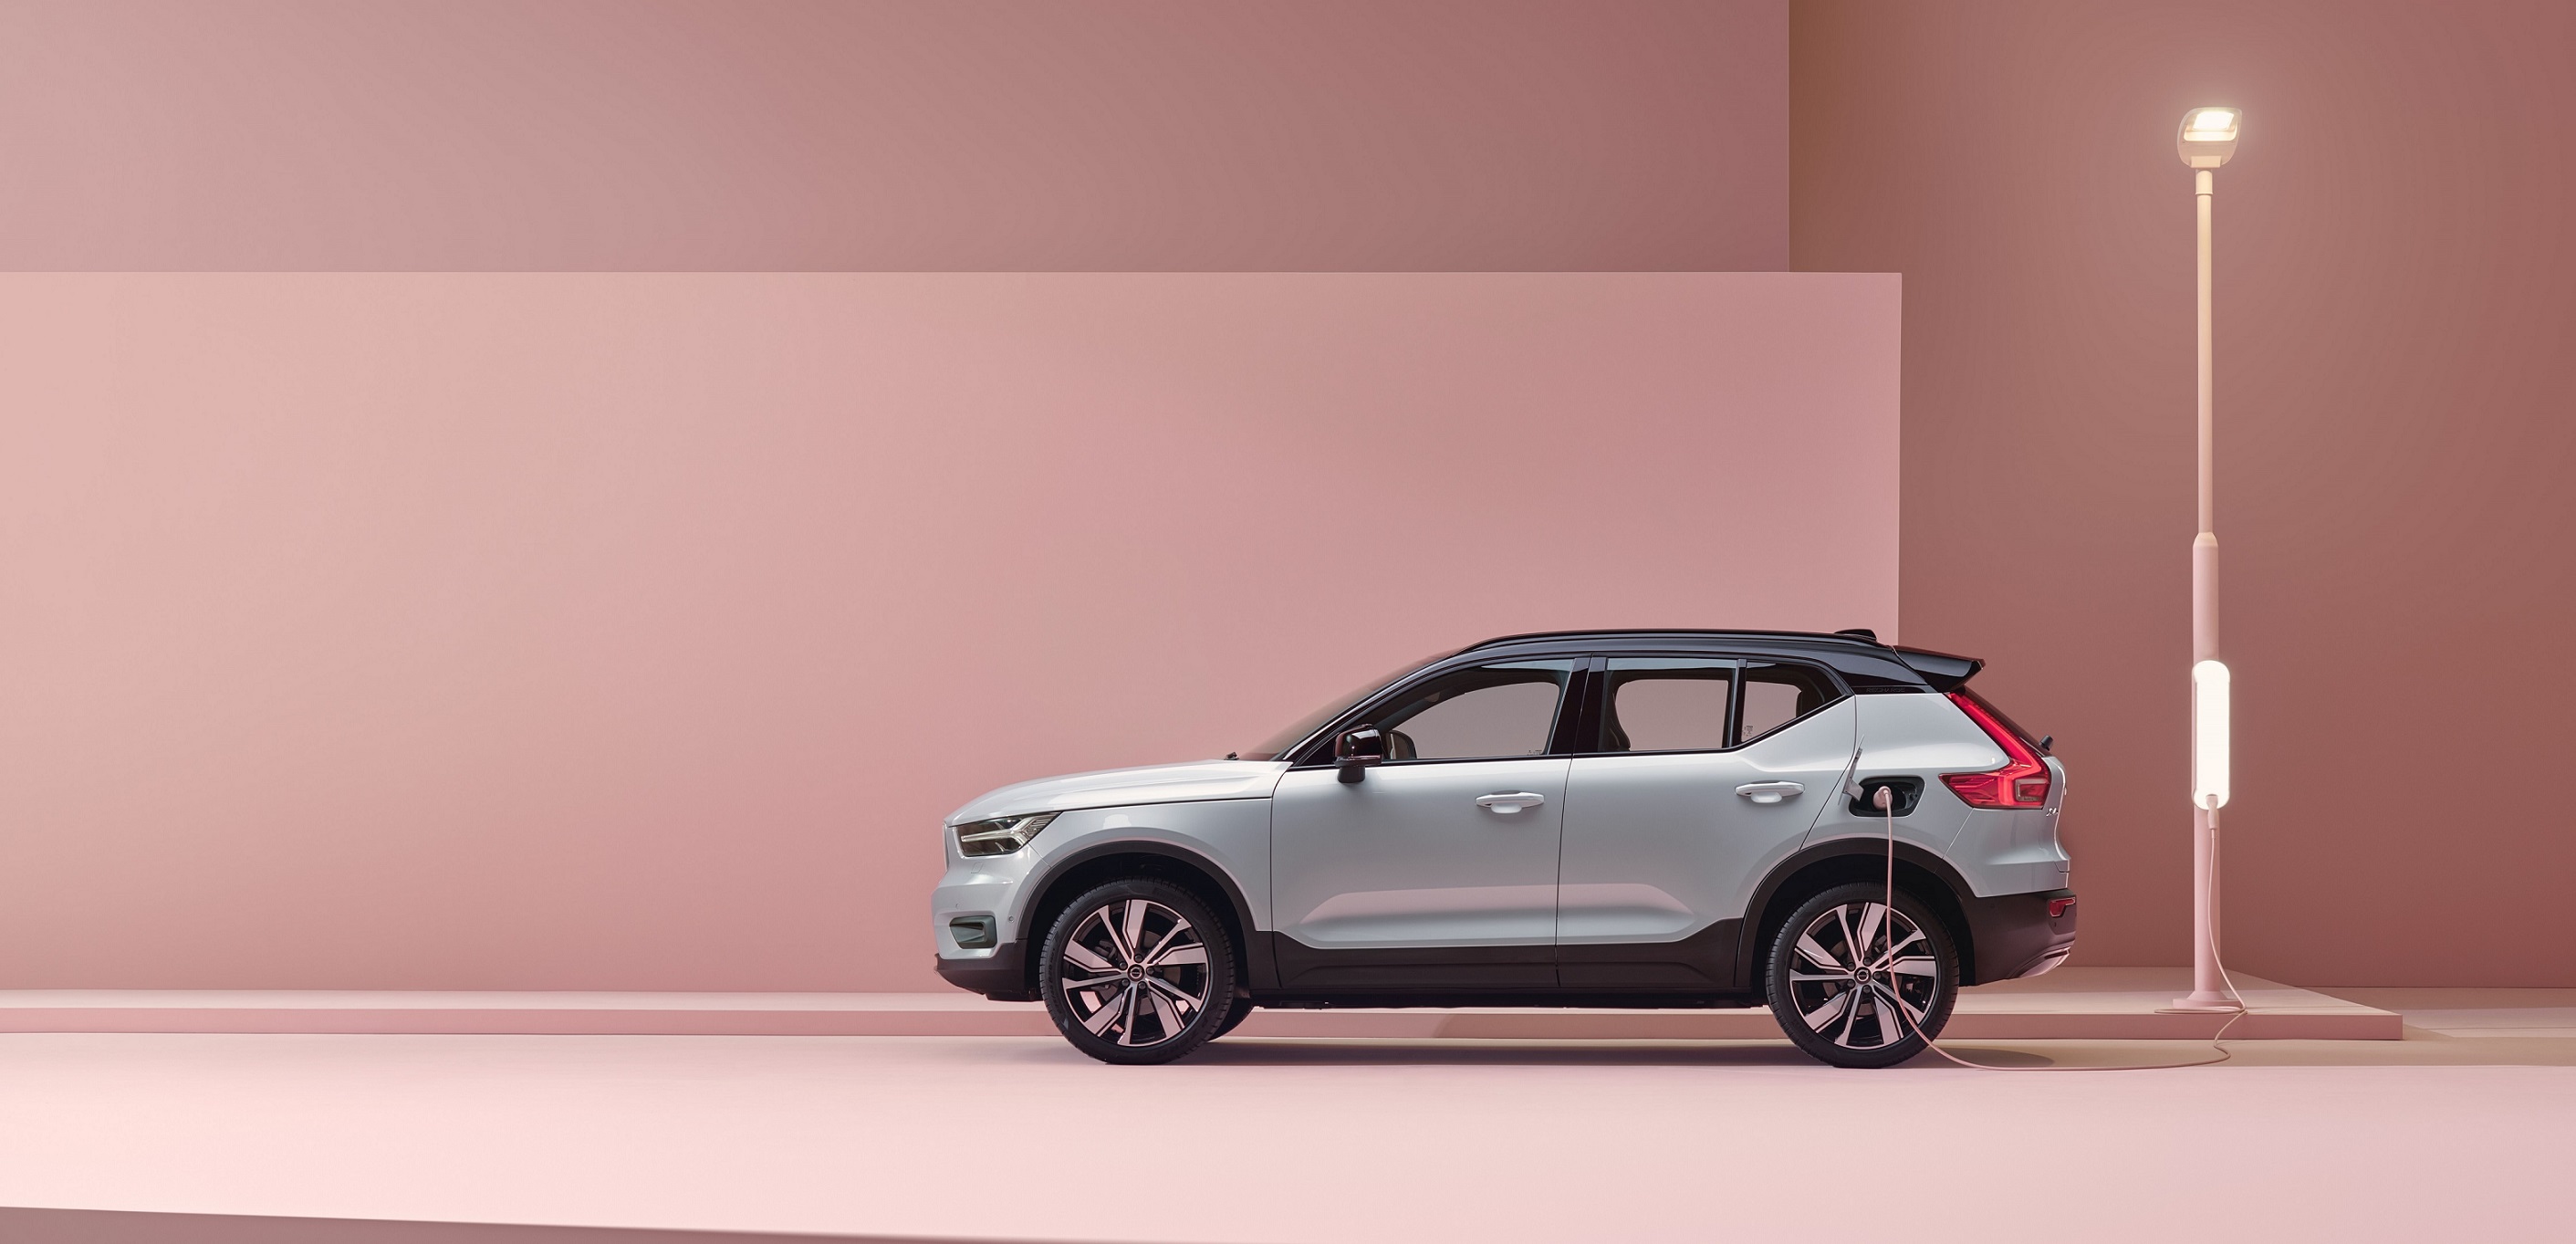 Trading Enterprises Volvo ‘Walks The Talk’ with the global launch of an exclusive sustainable sneaker on World Car-Free  Day